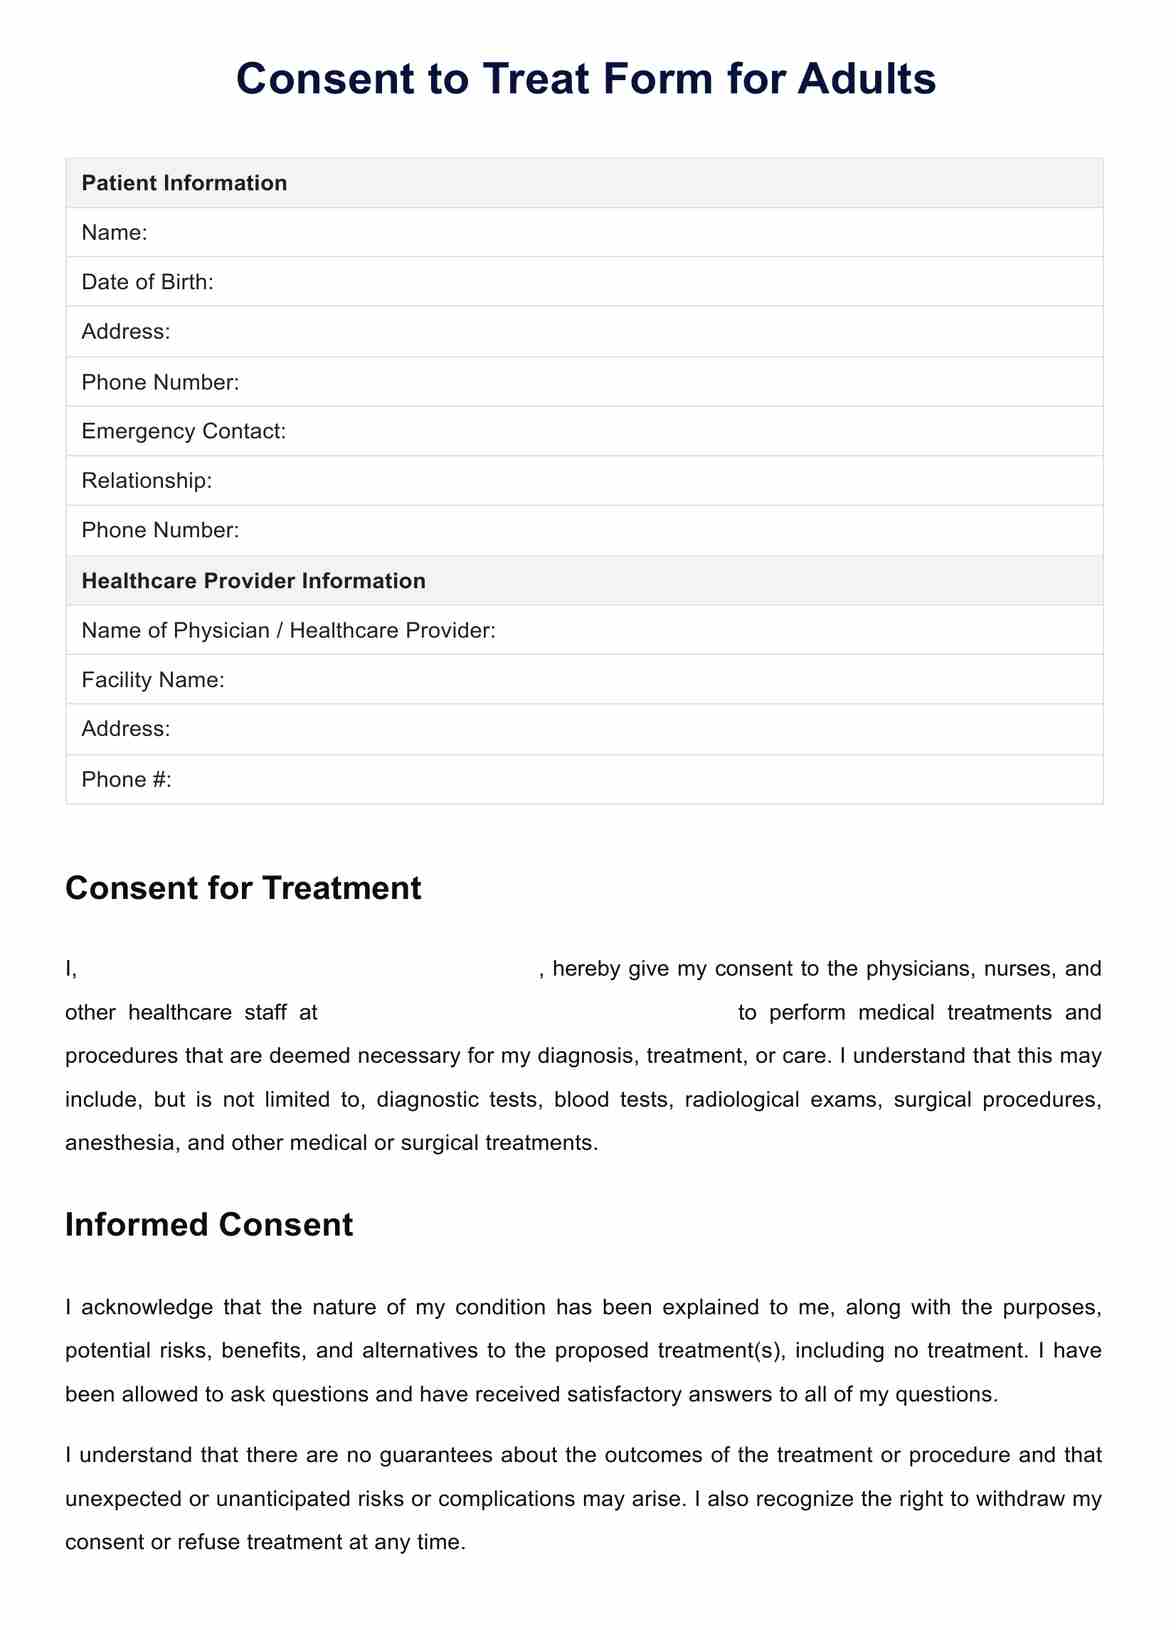 Consent to Treat Form for Adults PDF Example